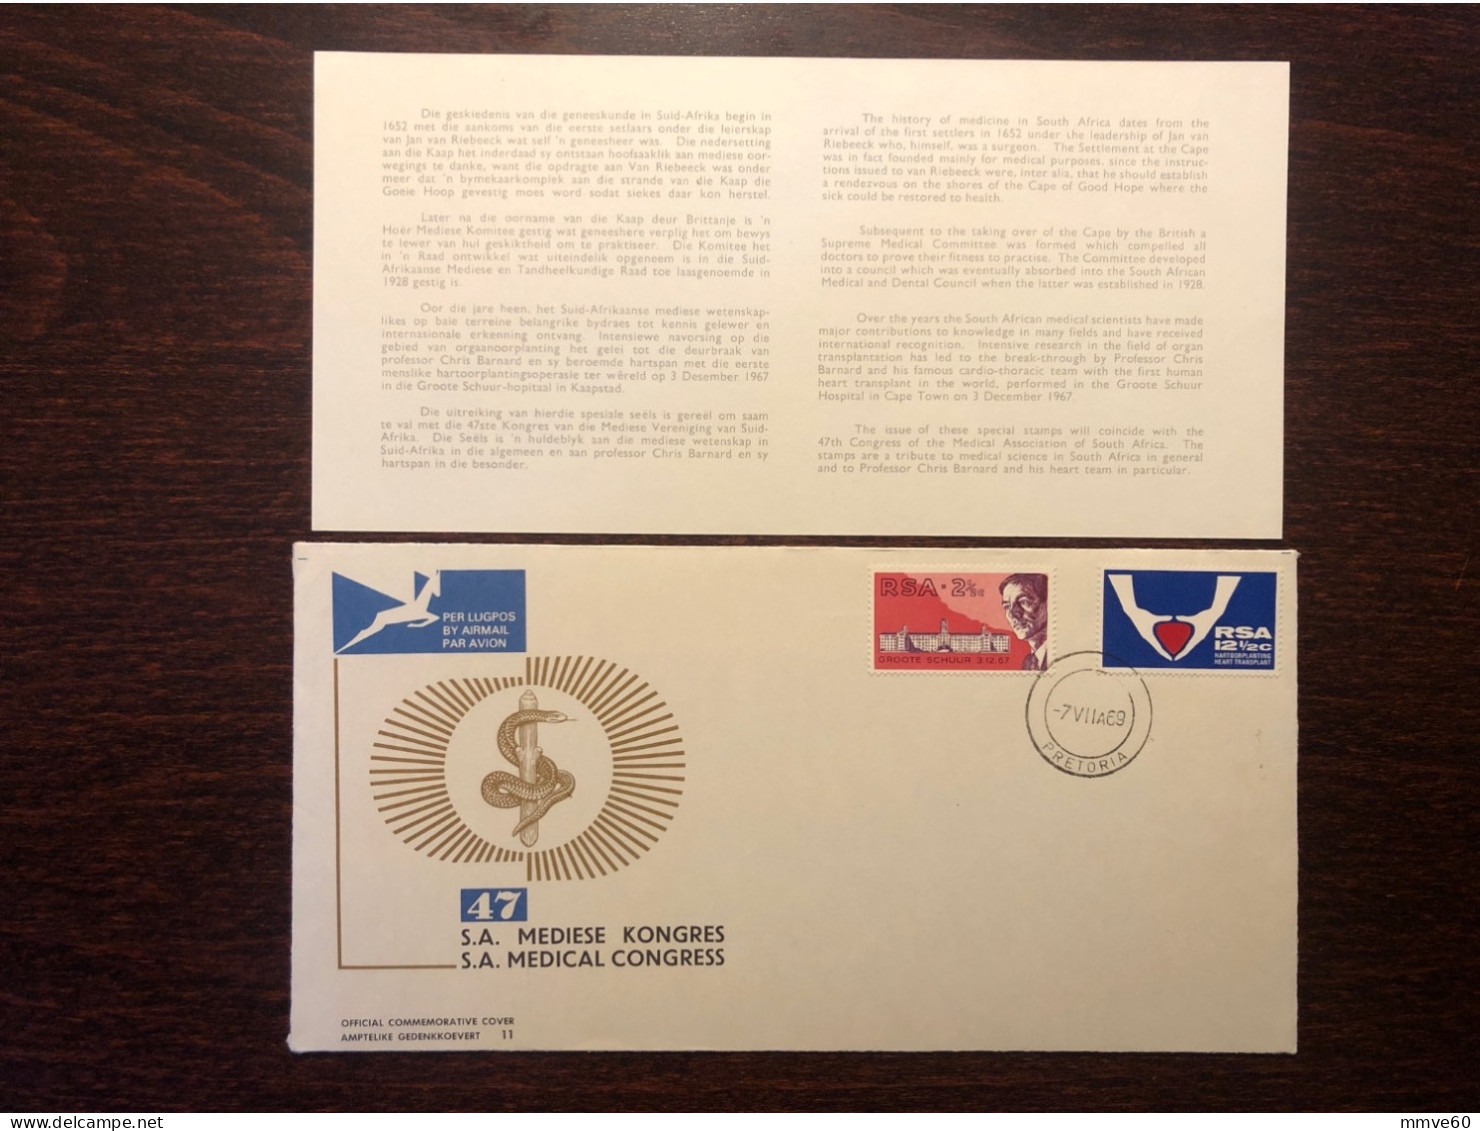 SOUTH AFRICA FDC COVER 1969 YEAR BARNARD CARDIOLOGY HEART SURGERY HEALTH MEDICINE STAMPS - FDC